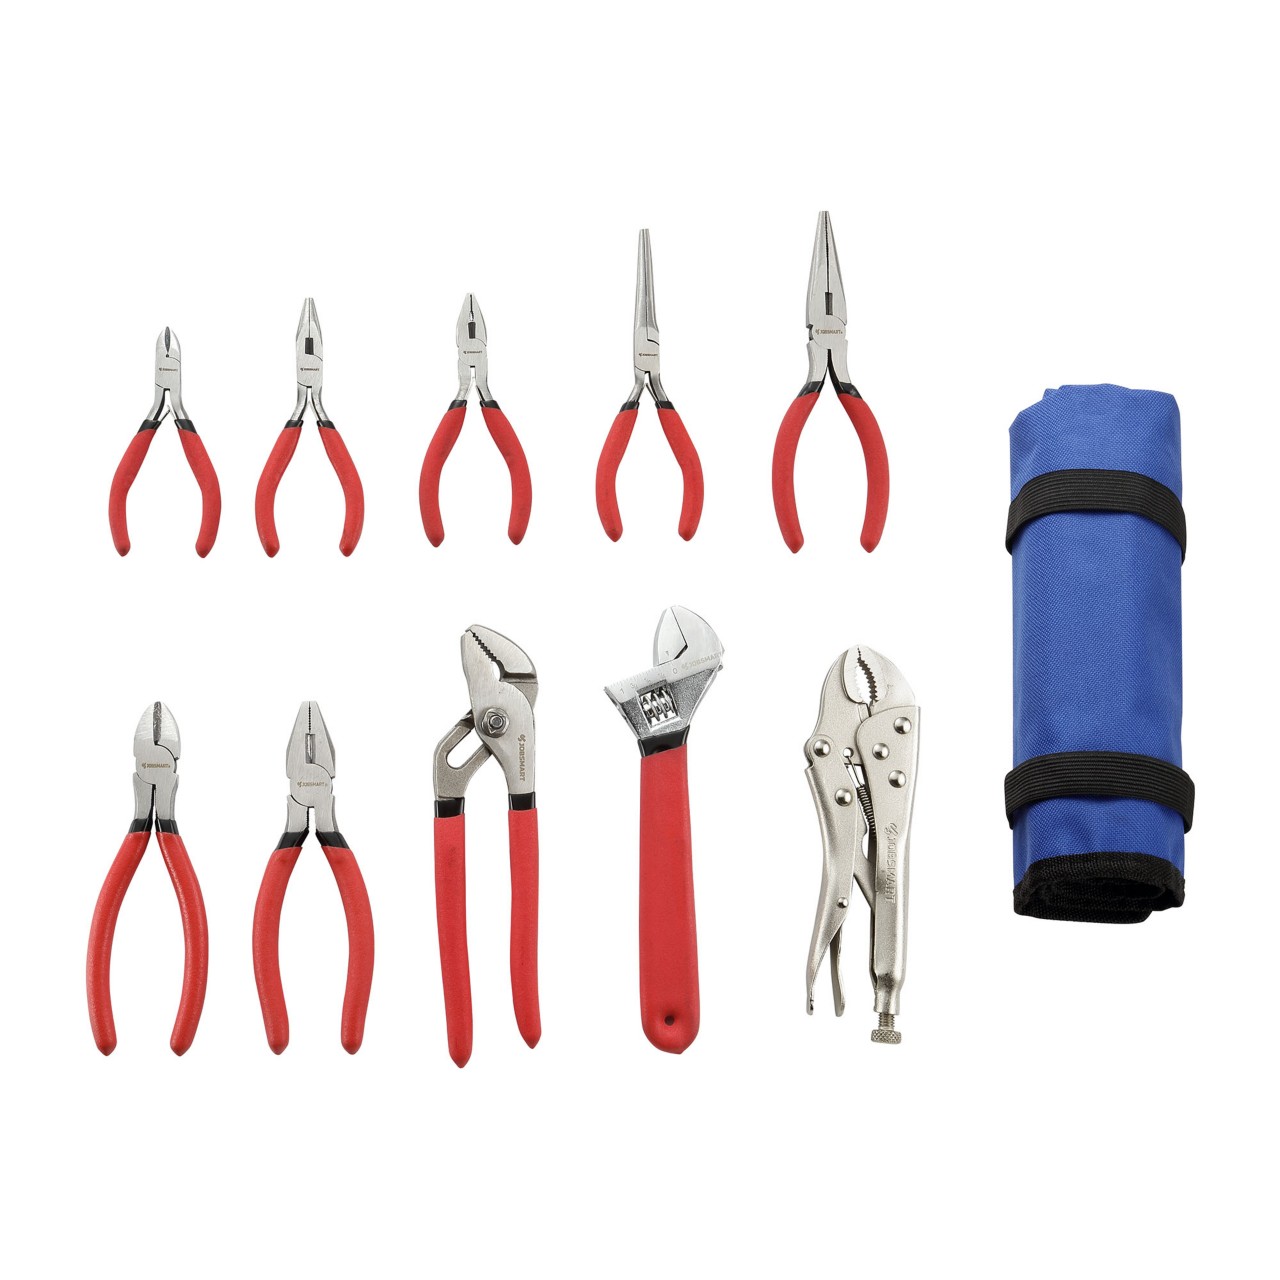 Image of a plier set links to all pliers catalog.